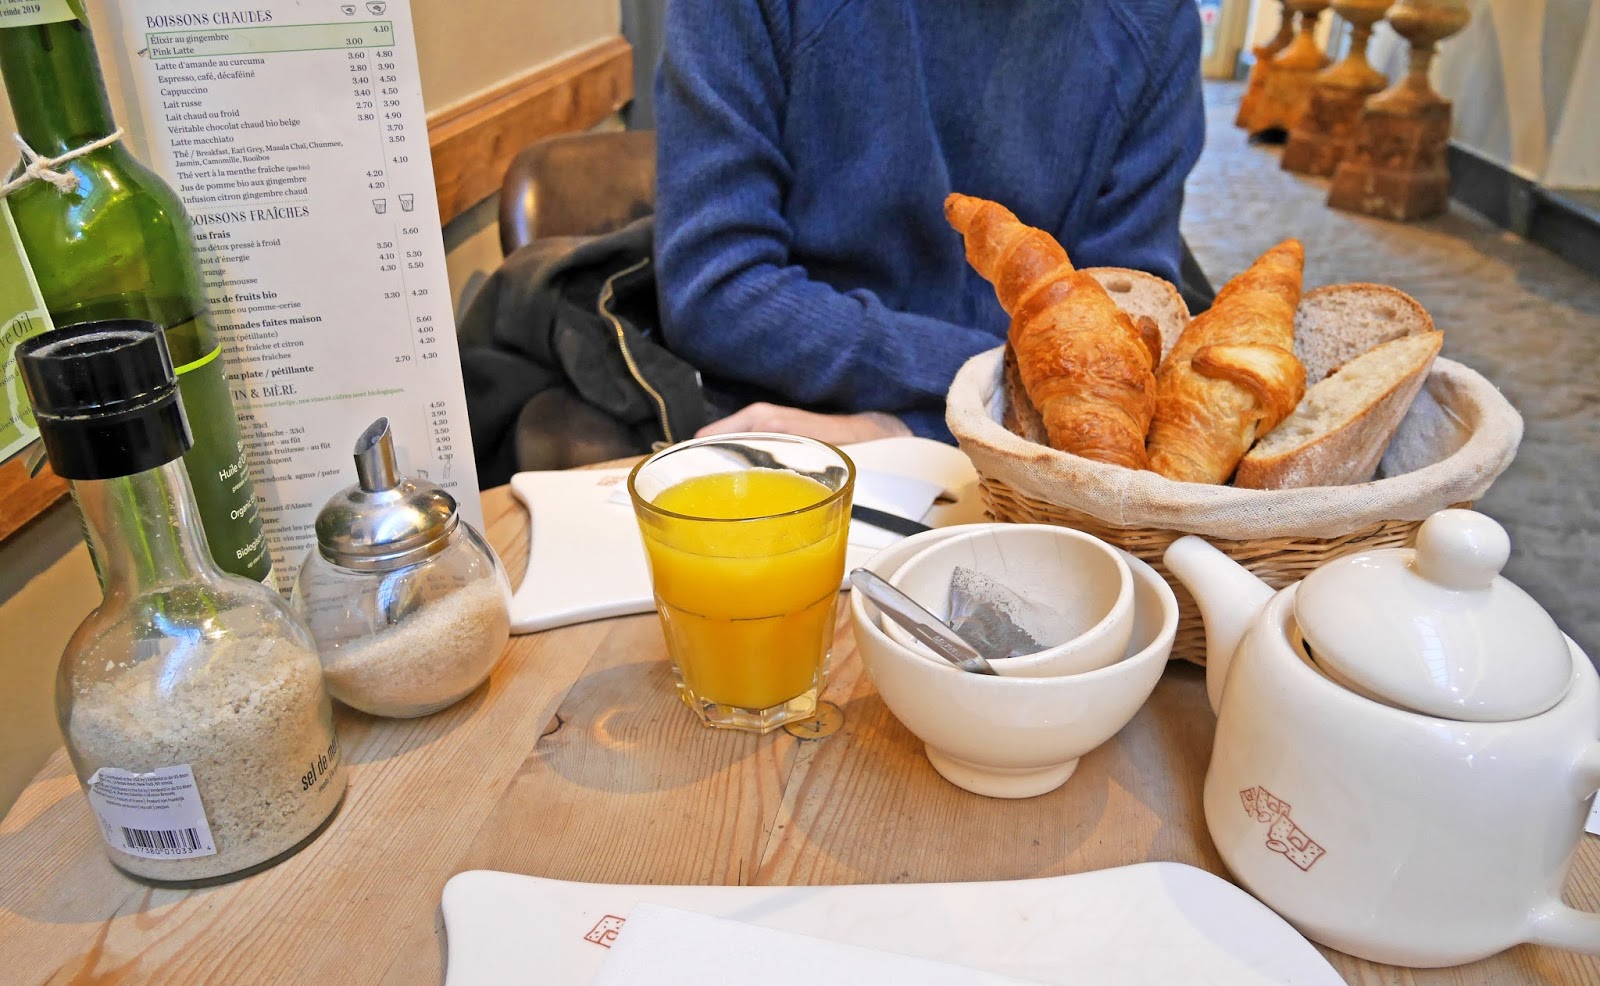 Pastries for breakfast at Le Pain Quotidien, Bruges